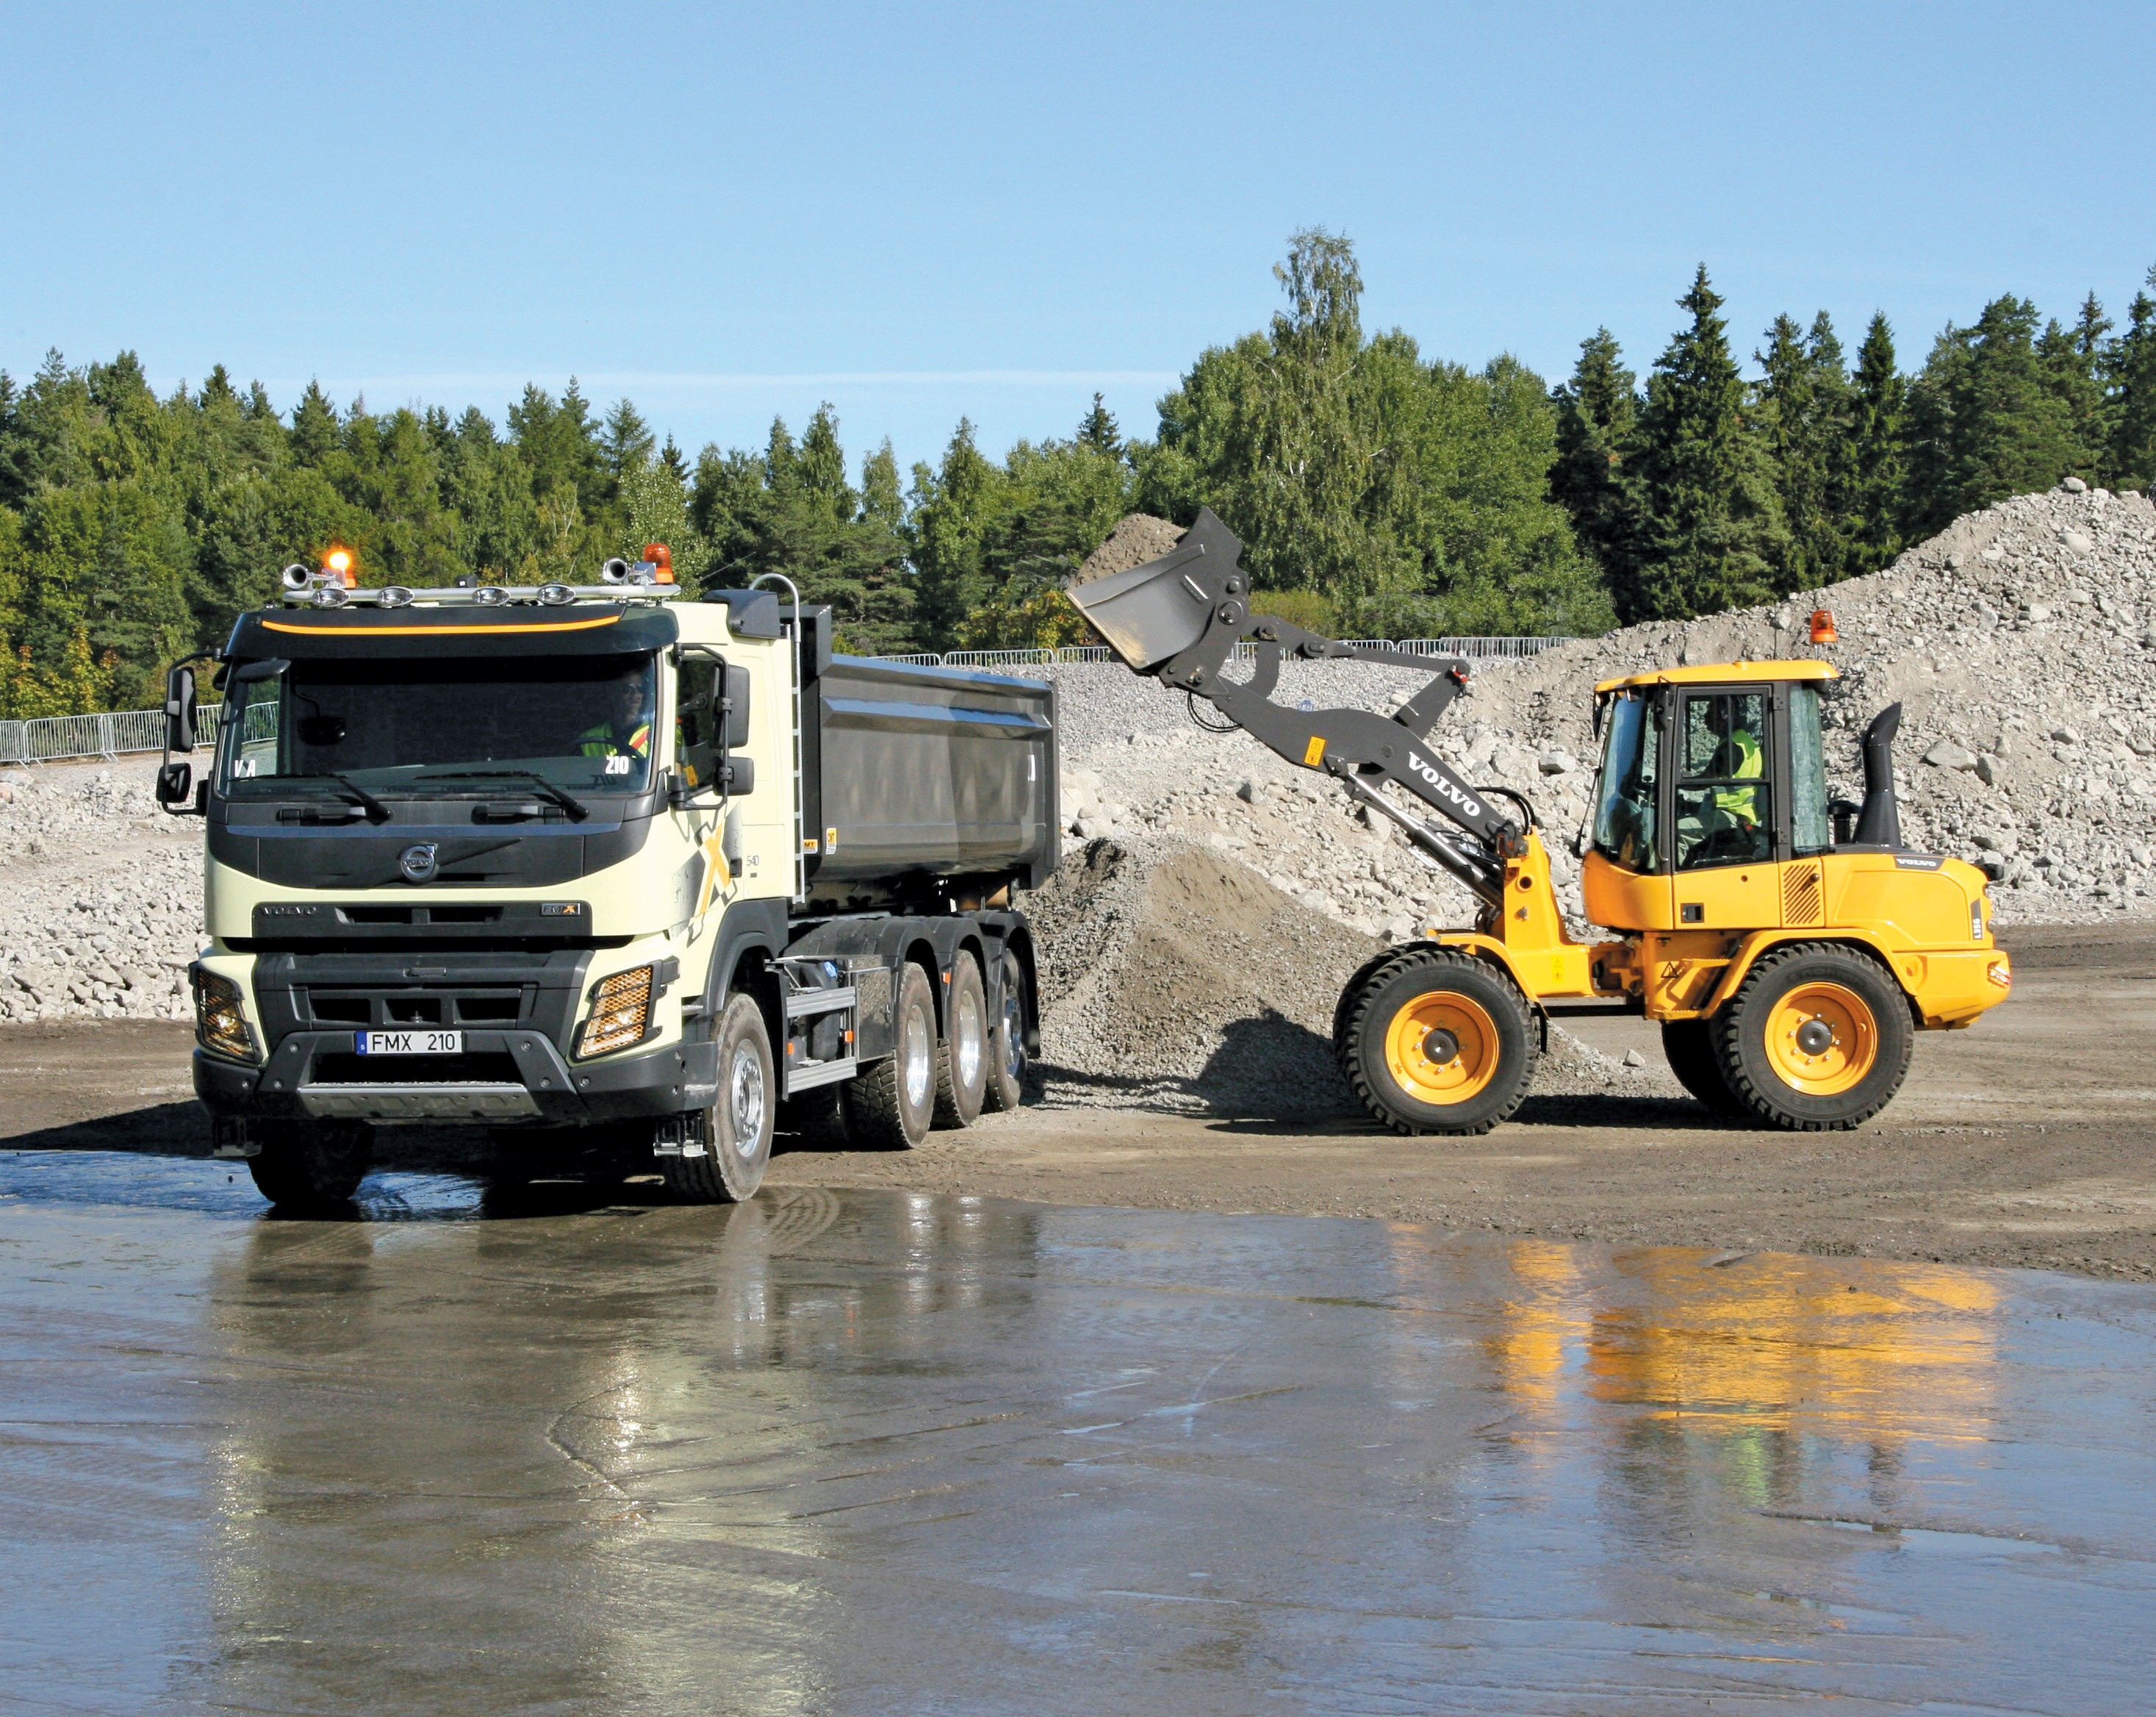 Volvo The L30 and L35 compact wheeled loaders